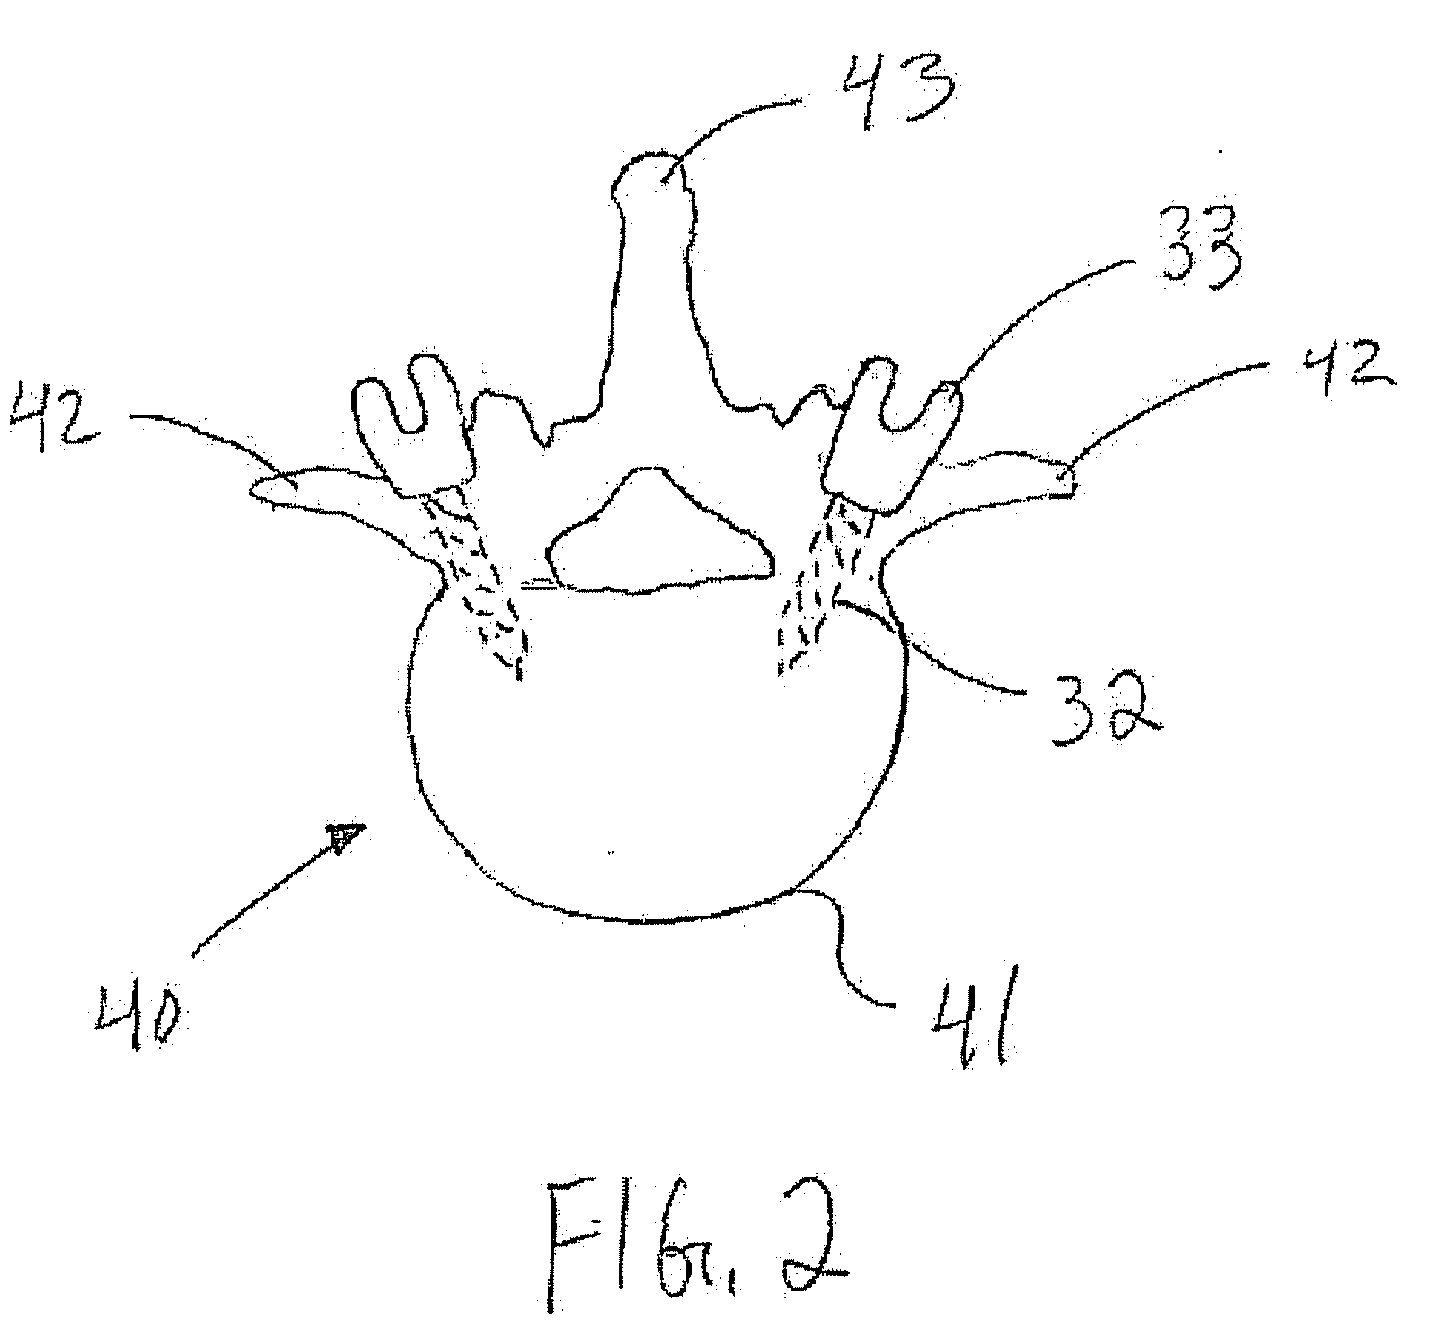 Percutaneous spinal rod insertion system and related methods